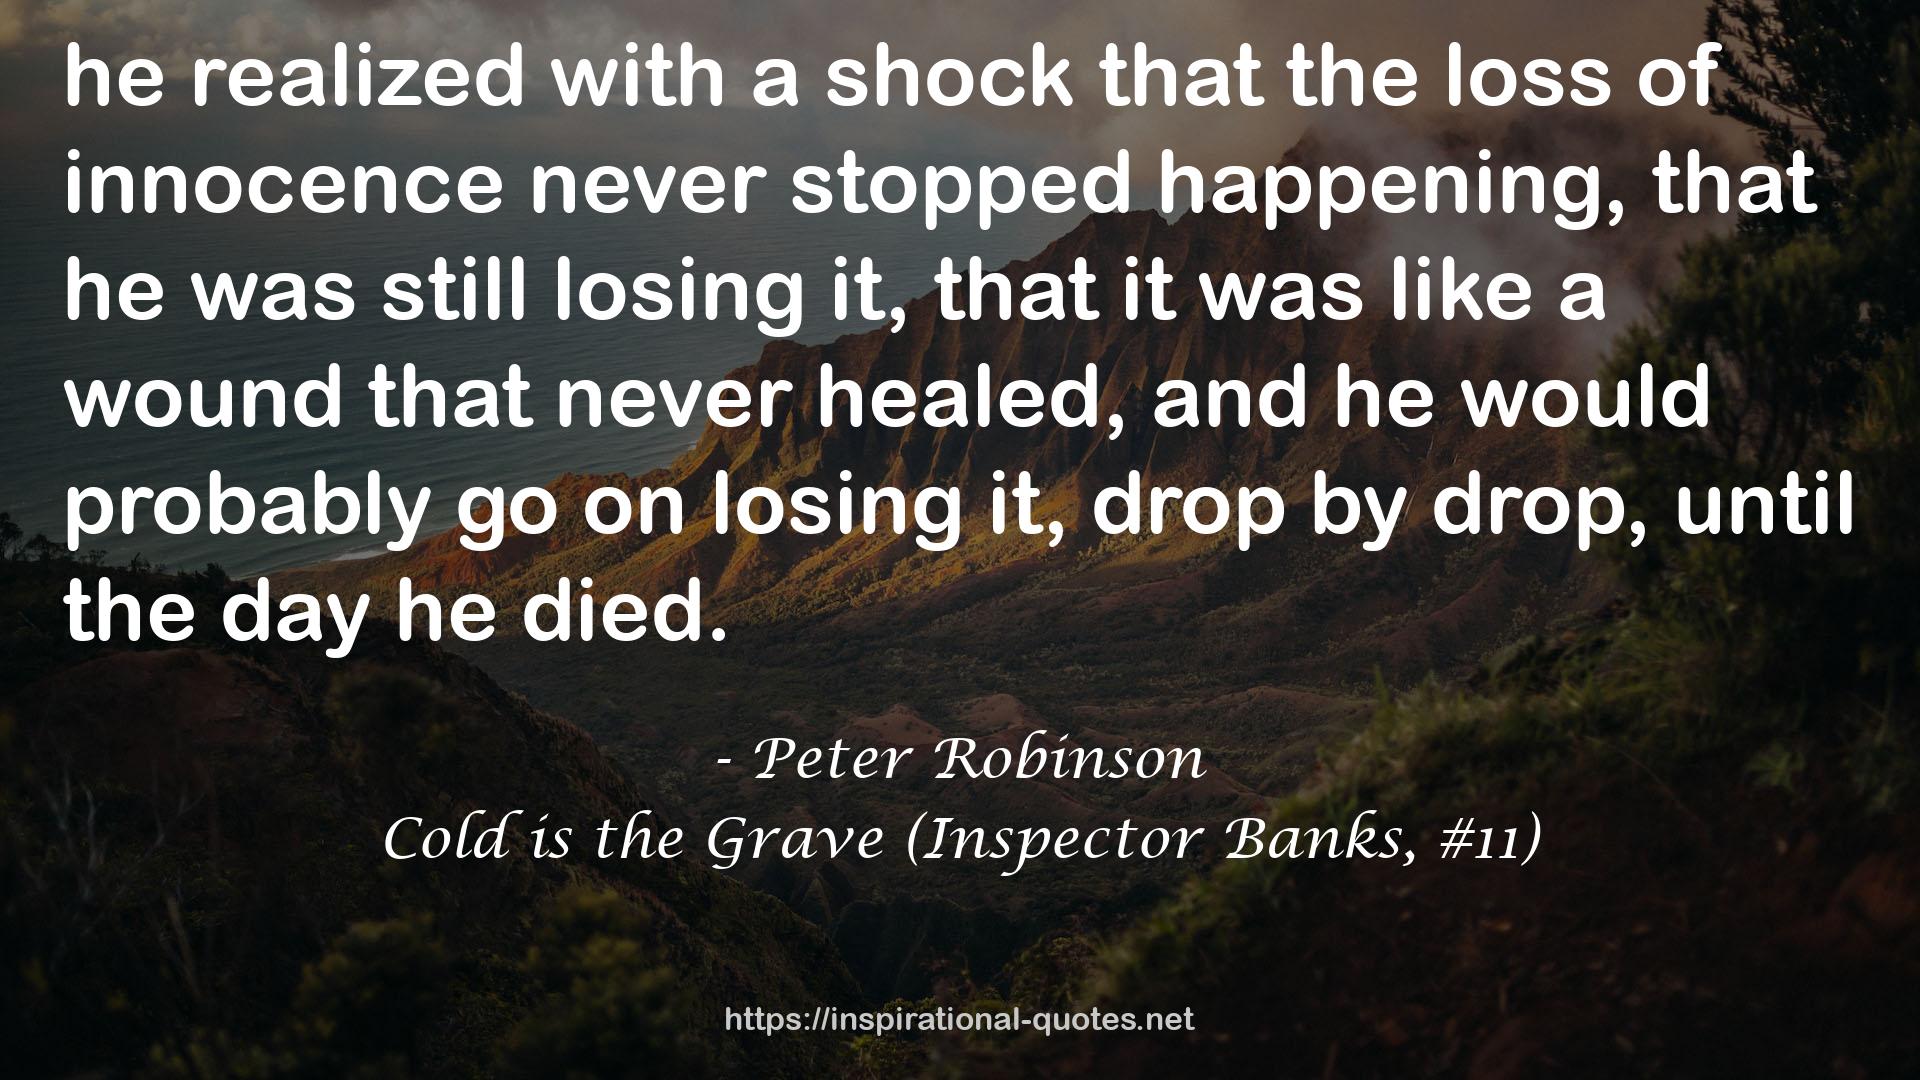 Cold is the Grave (Inspector Banks, #11) QUOTES